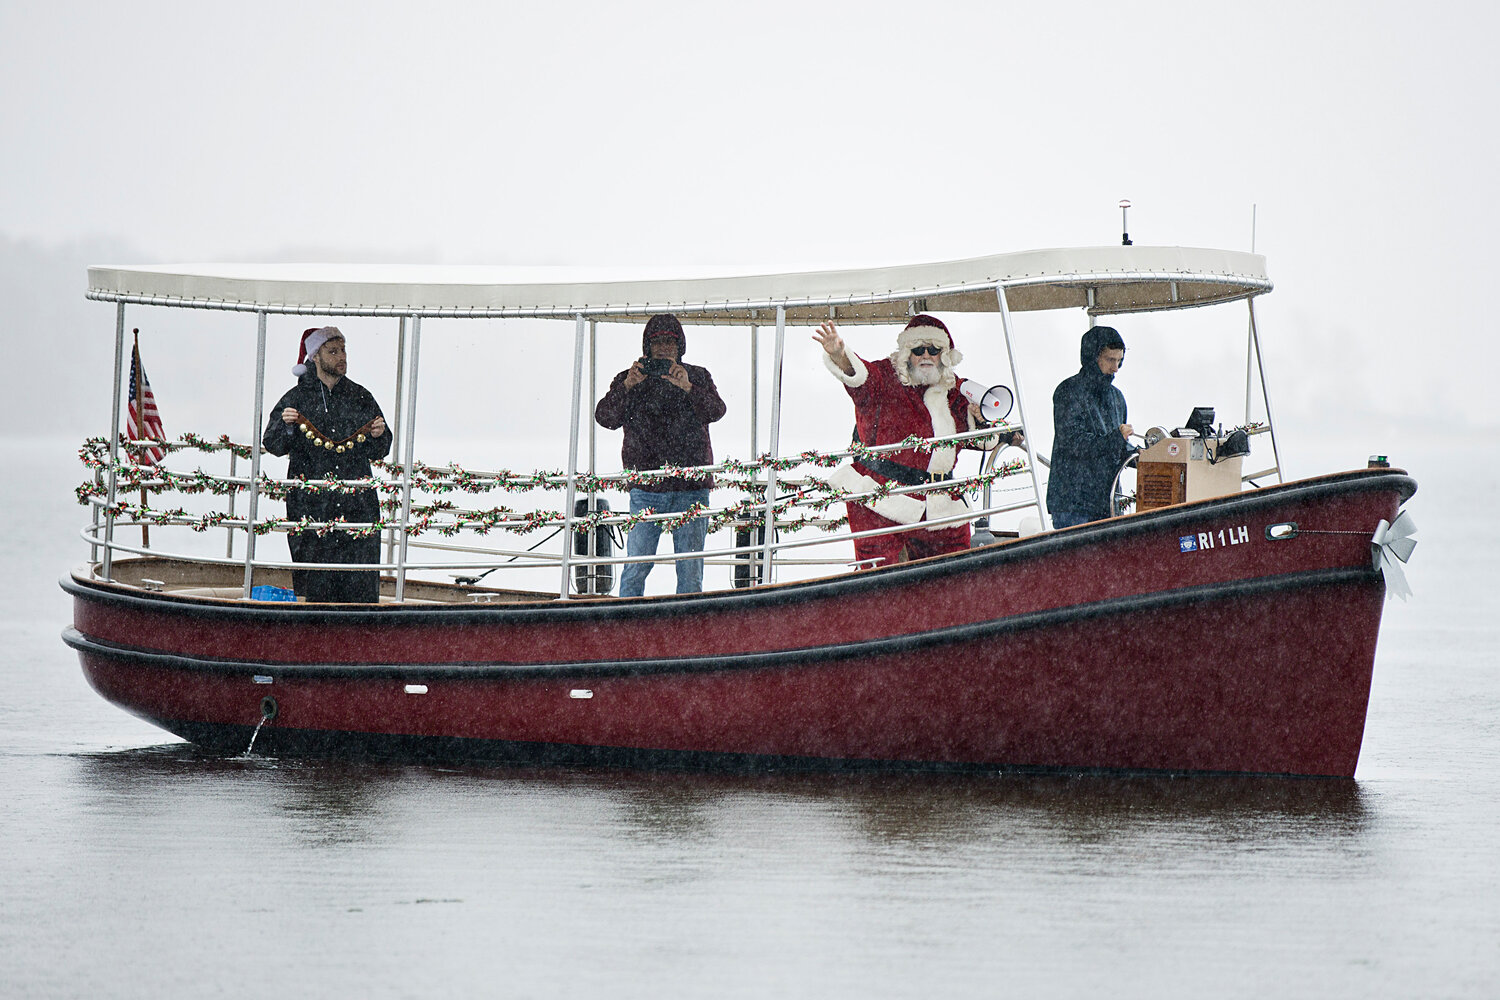 Santa Claus reached the shores at Sabin Point Park on a rainy Saturday morning, Nov. 18, aboard the "Lady Pomham II," the Friends of Pomham Rocks launch.